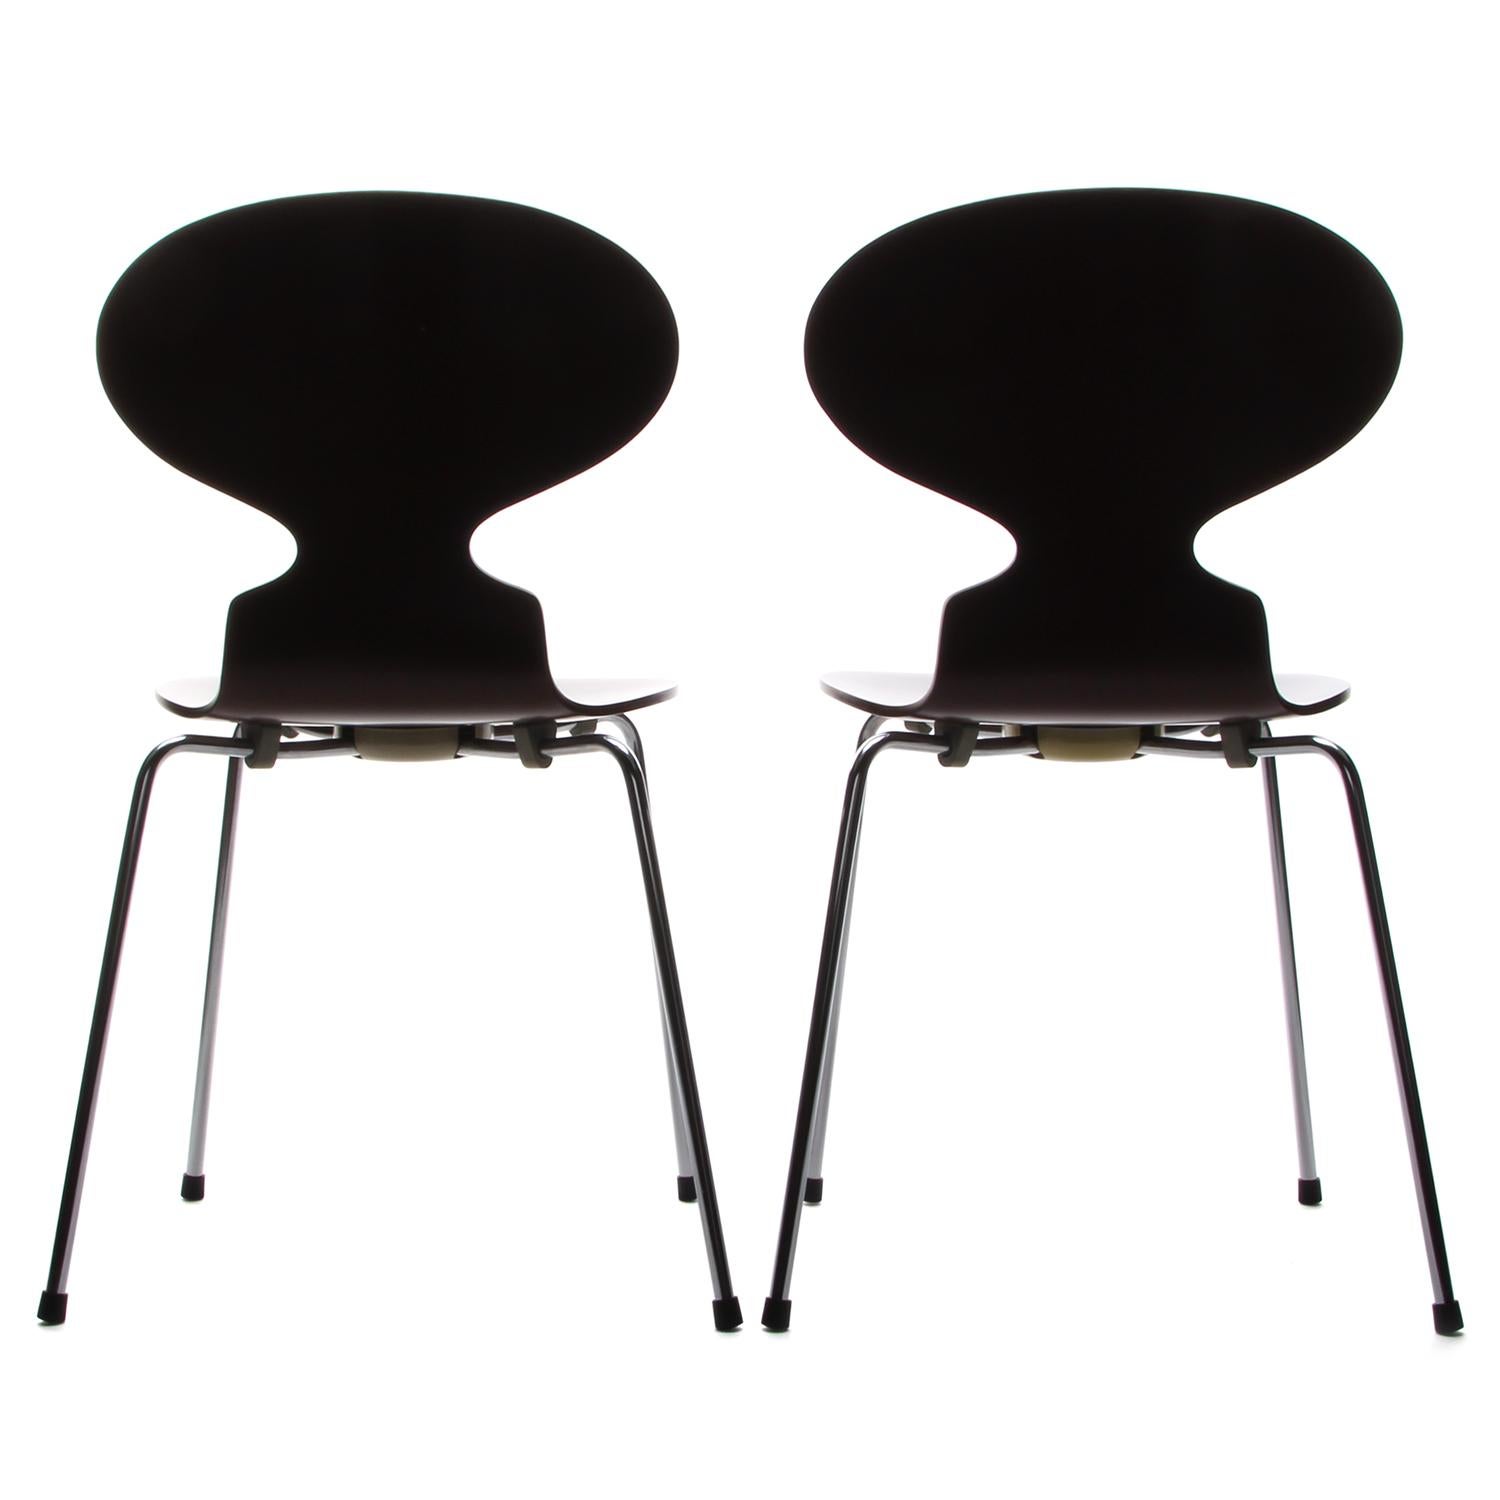 Danish Ant Chairs (Pair), Model 3100 Chairs by Arne Jacobsen for Fritz Hansen in 1952